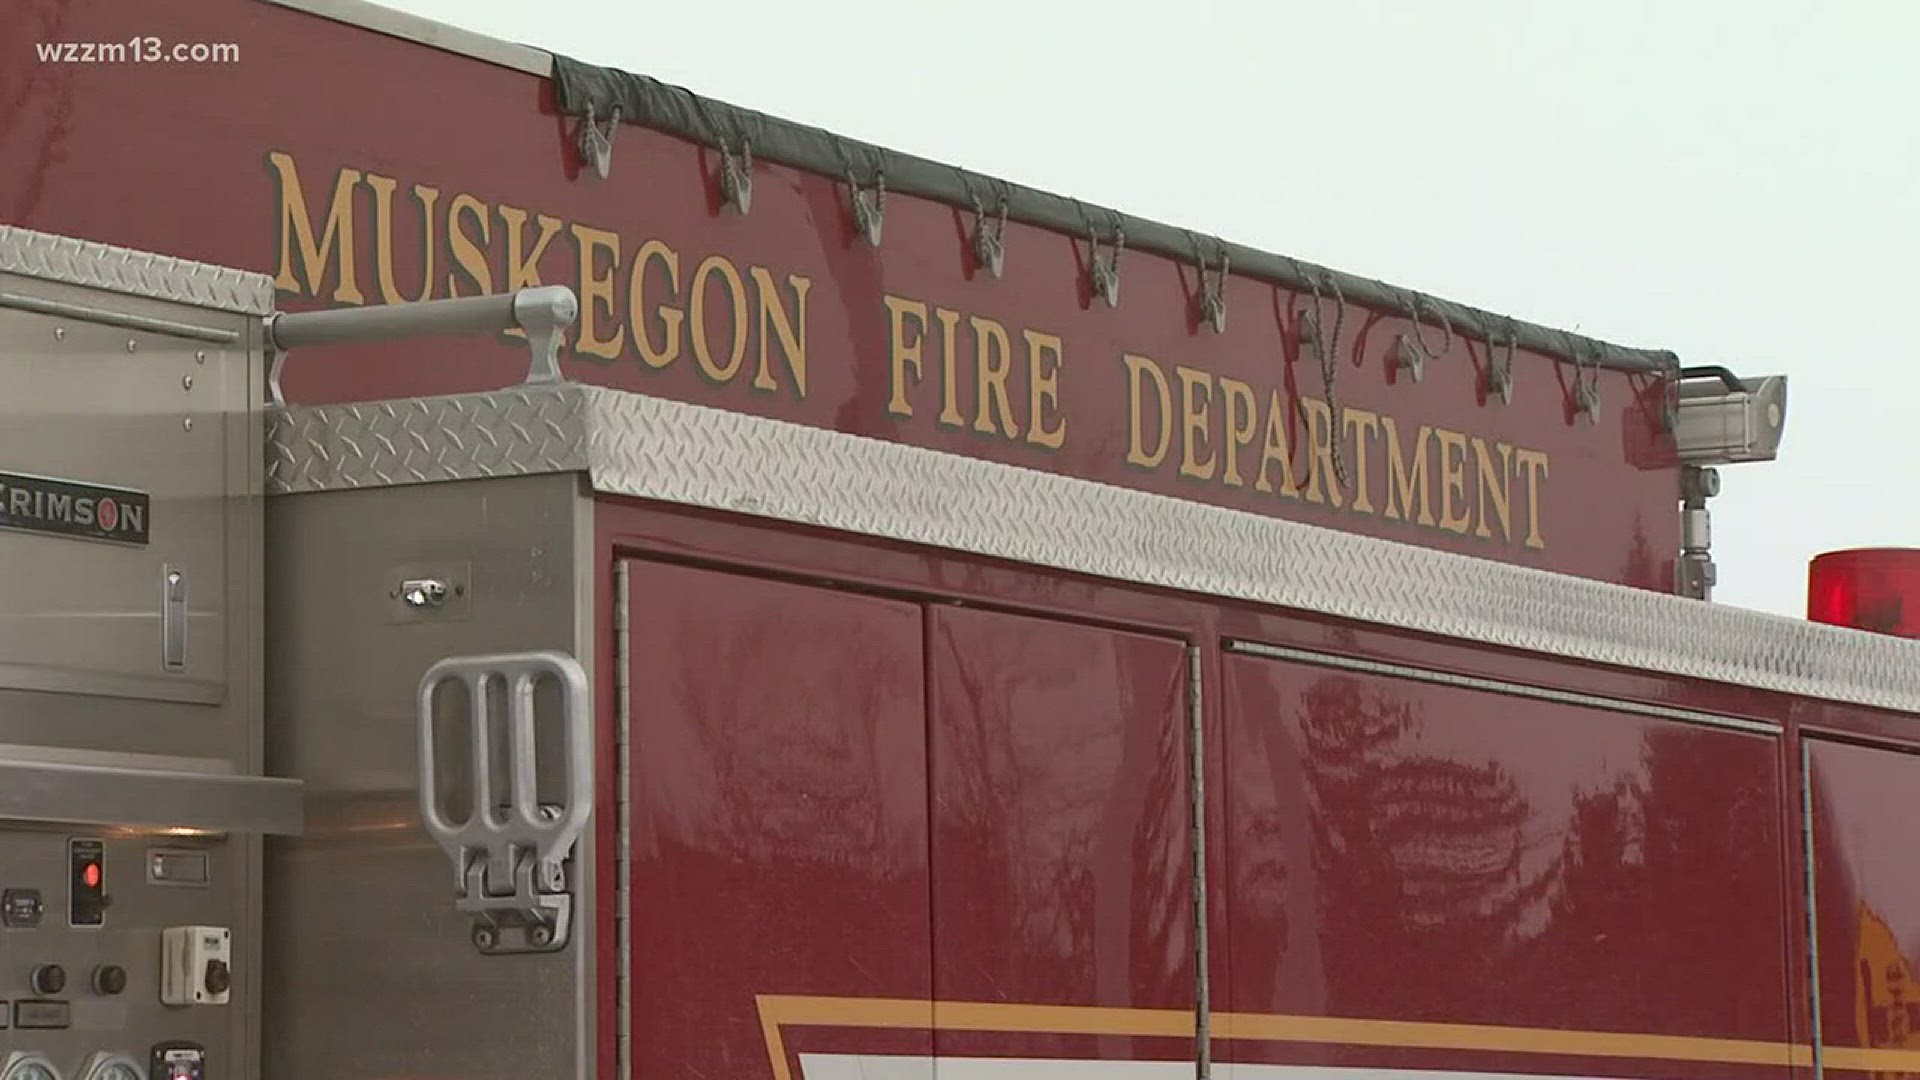 Muskegon considers fire department consolidation